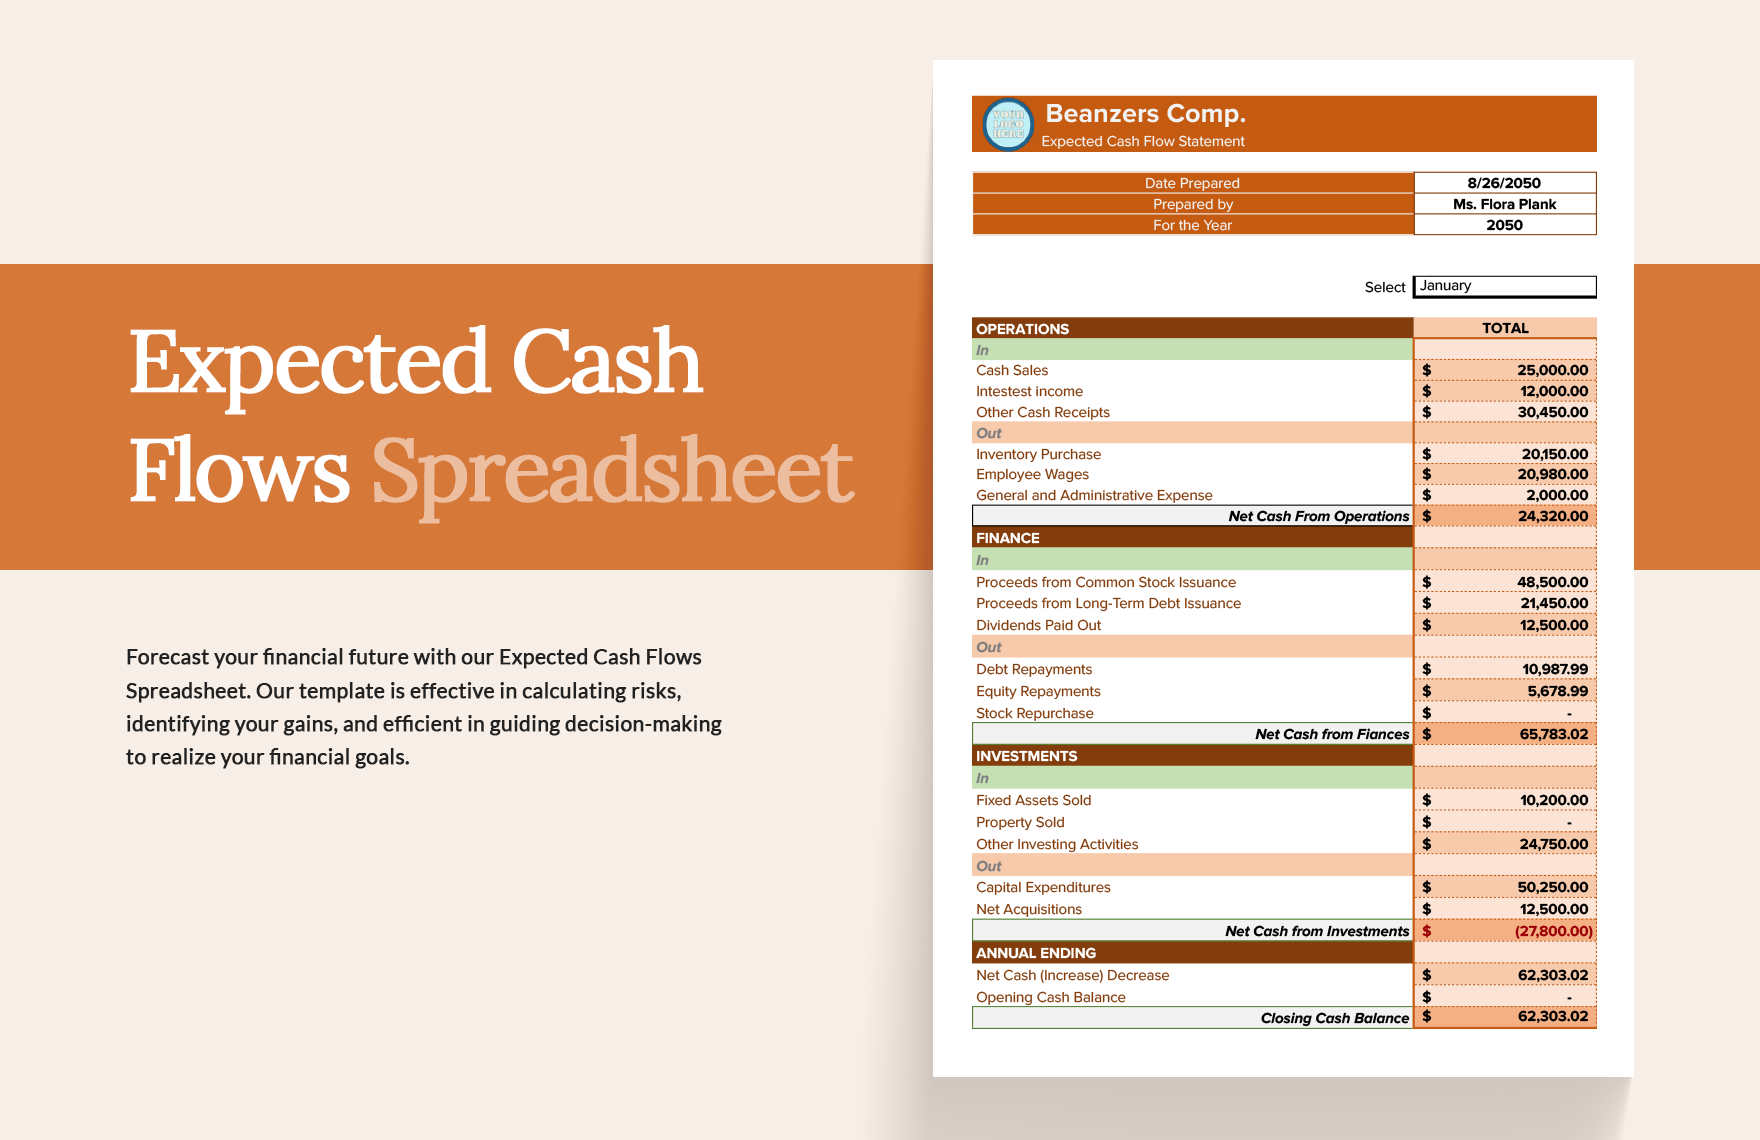 Expected Cash Flows Spreadsheet